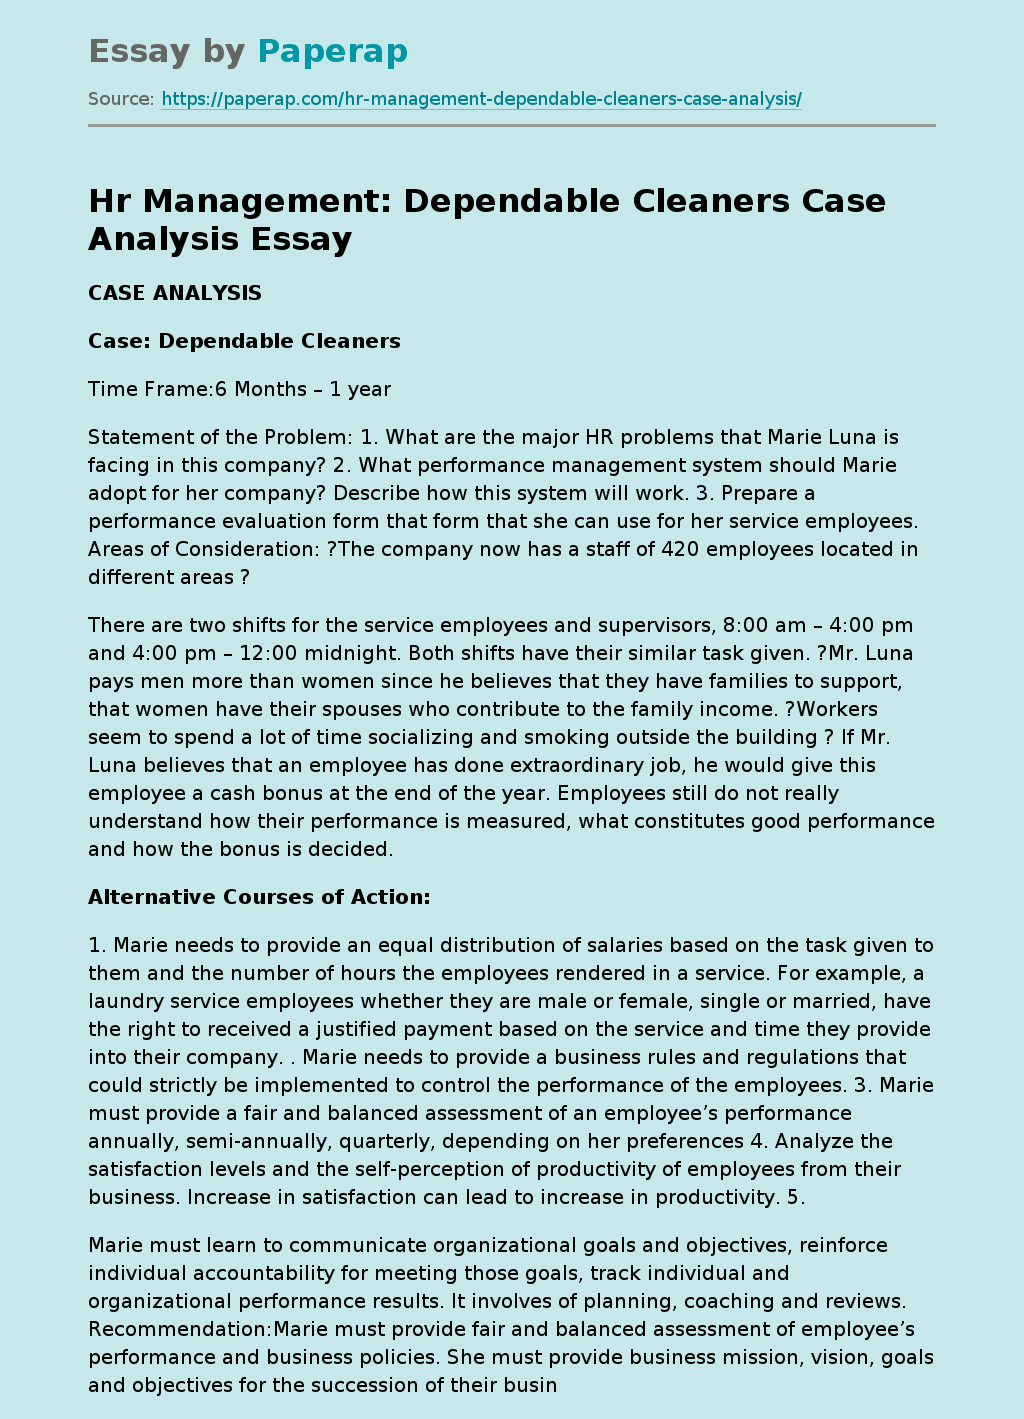 Hr Management: Dependable Cleaners Case Analysis